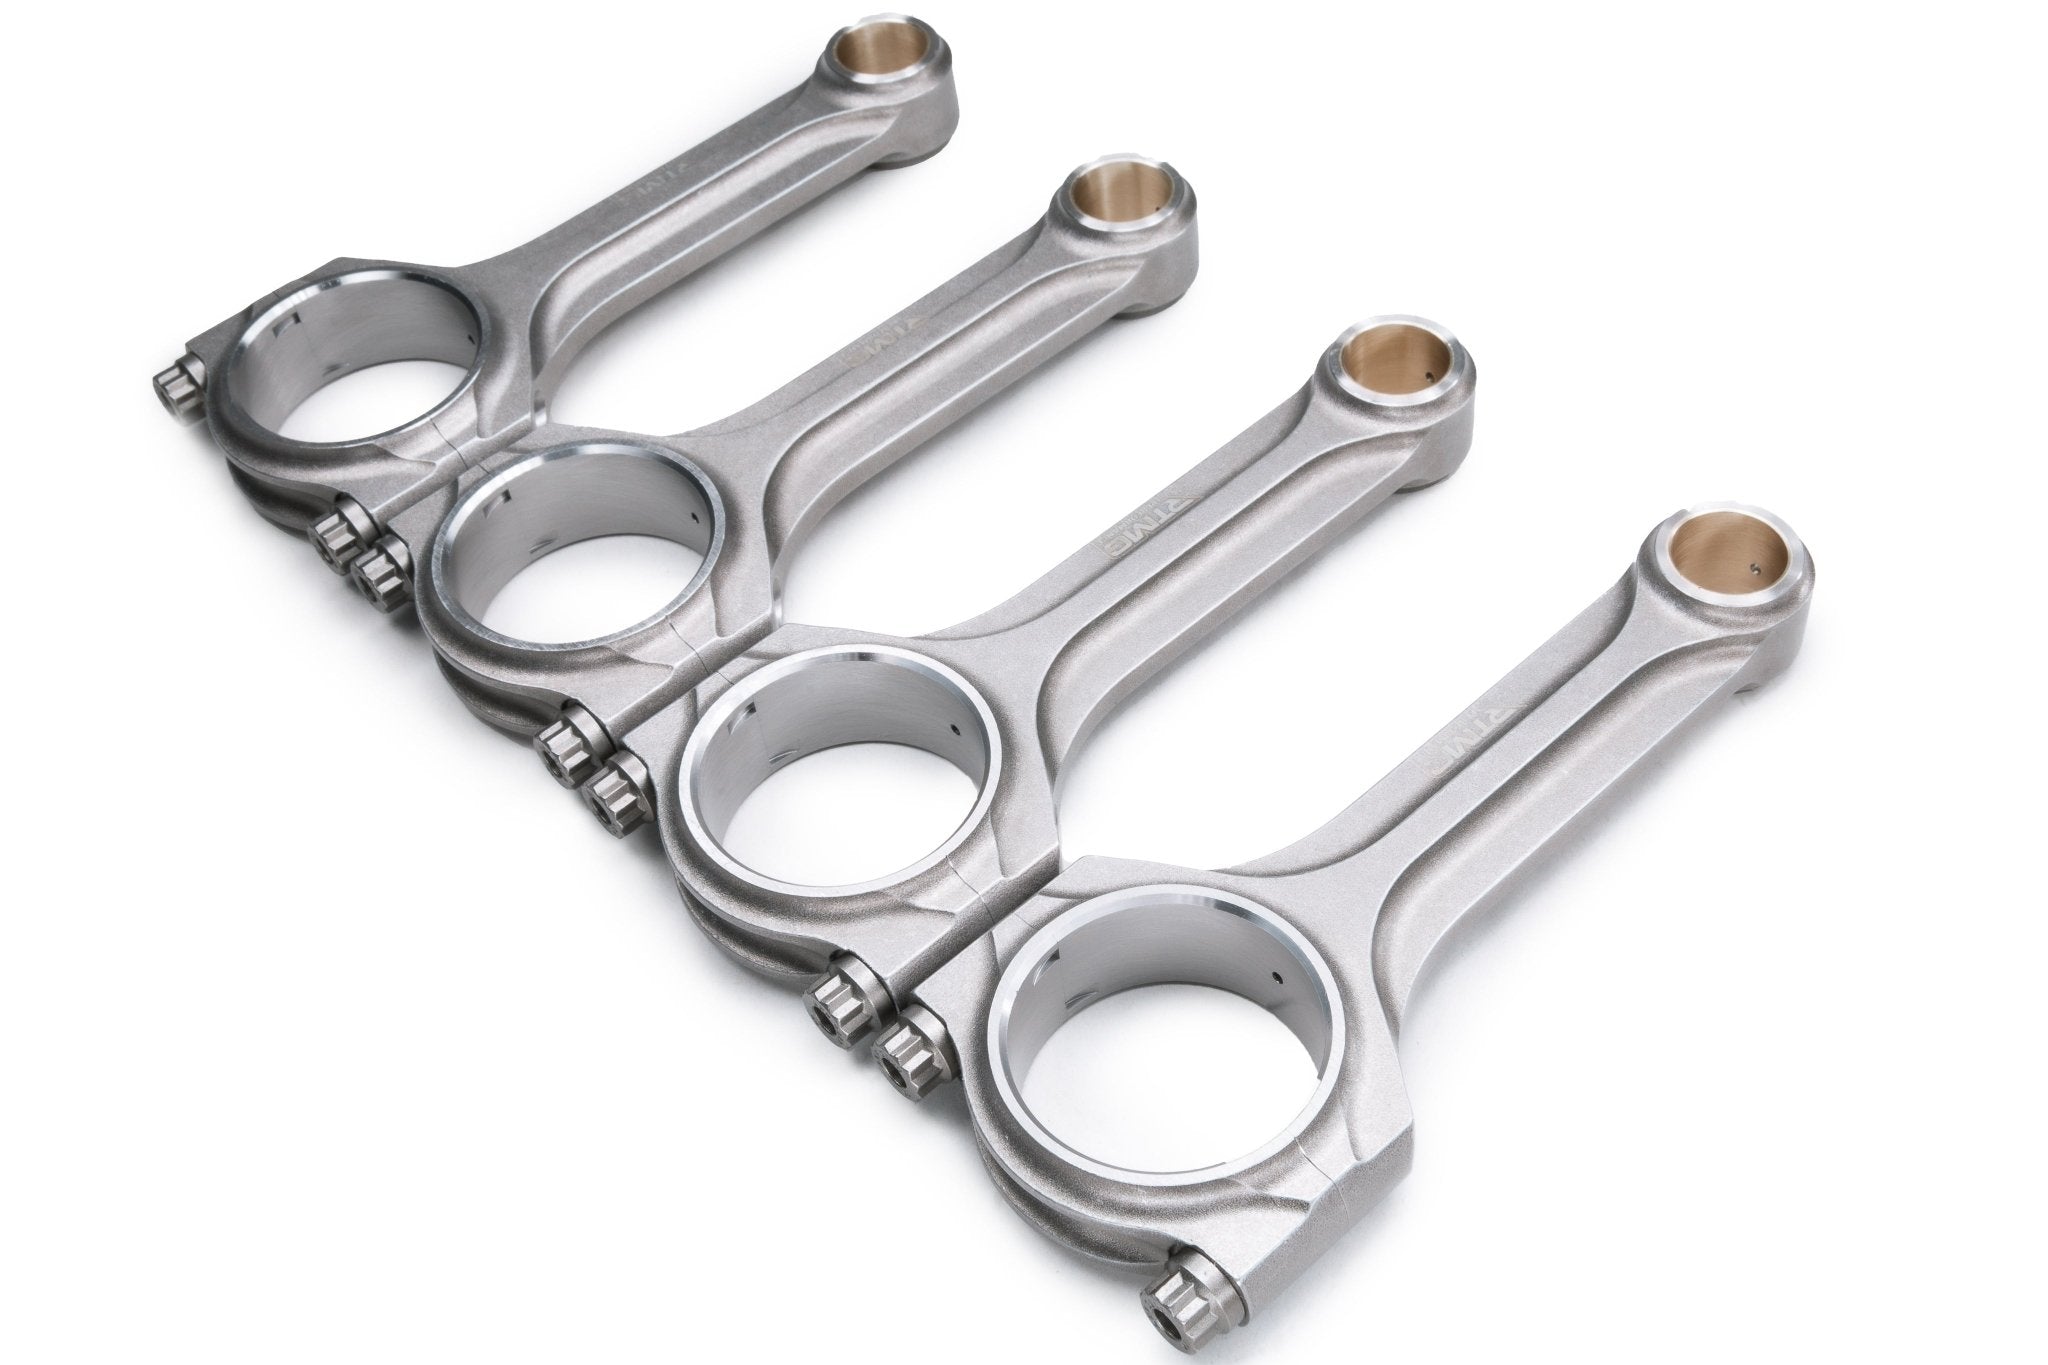 Connecting Rods Set X-Beam for 2.0 TFSI EA113 - Up to 1000HP+ - RTMG Performance